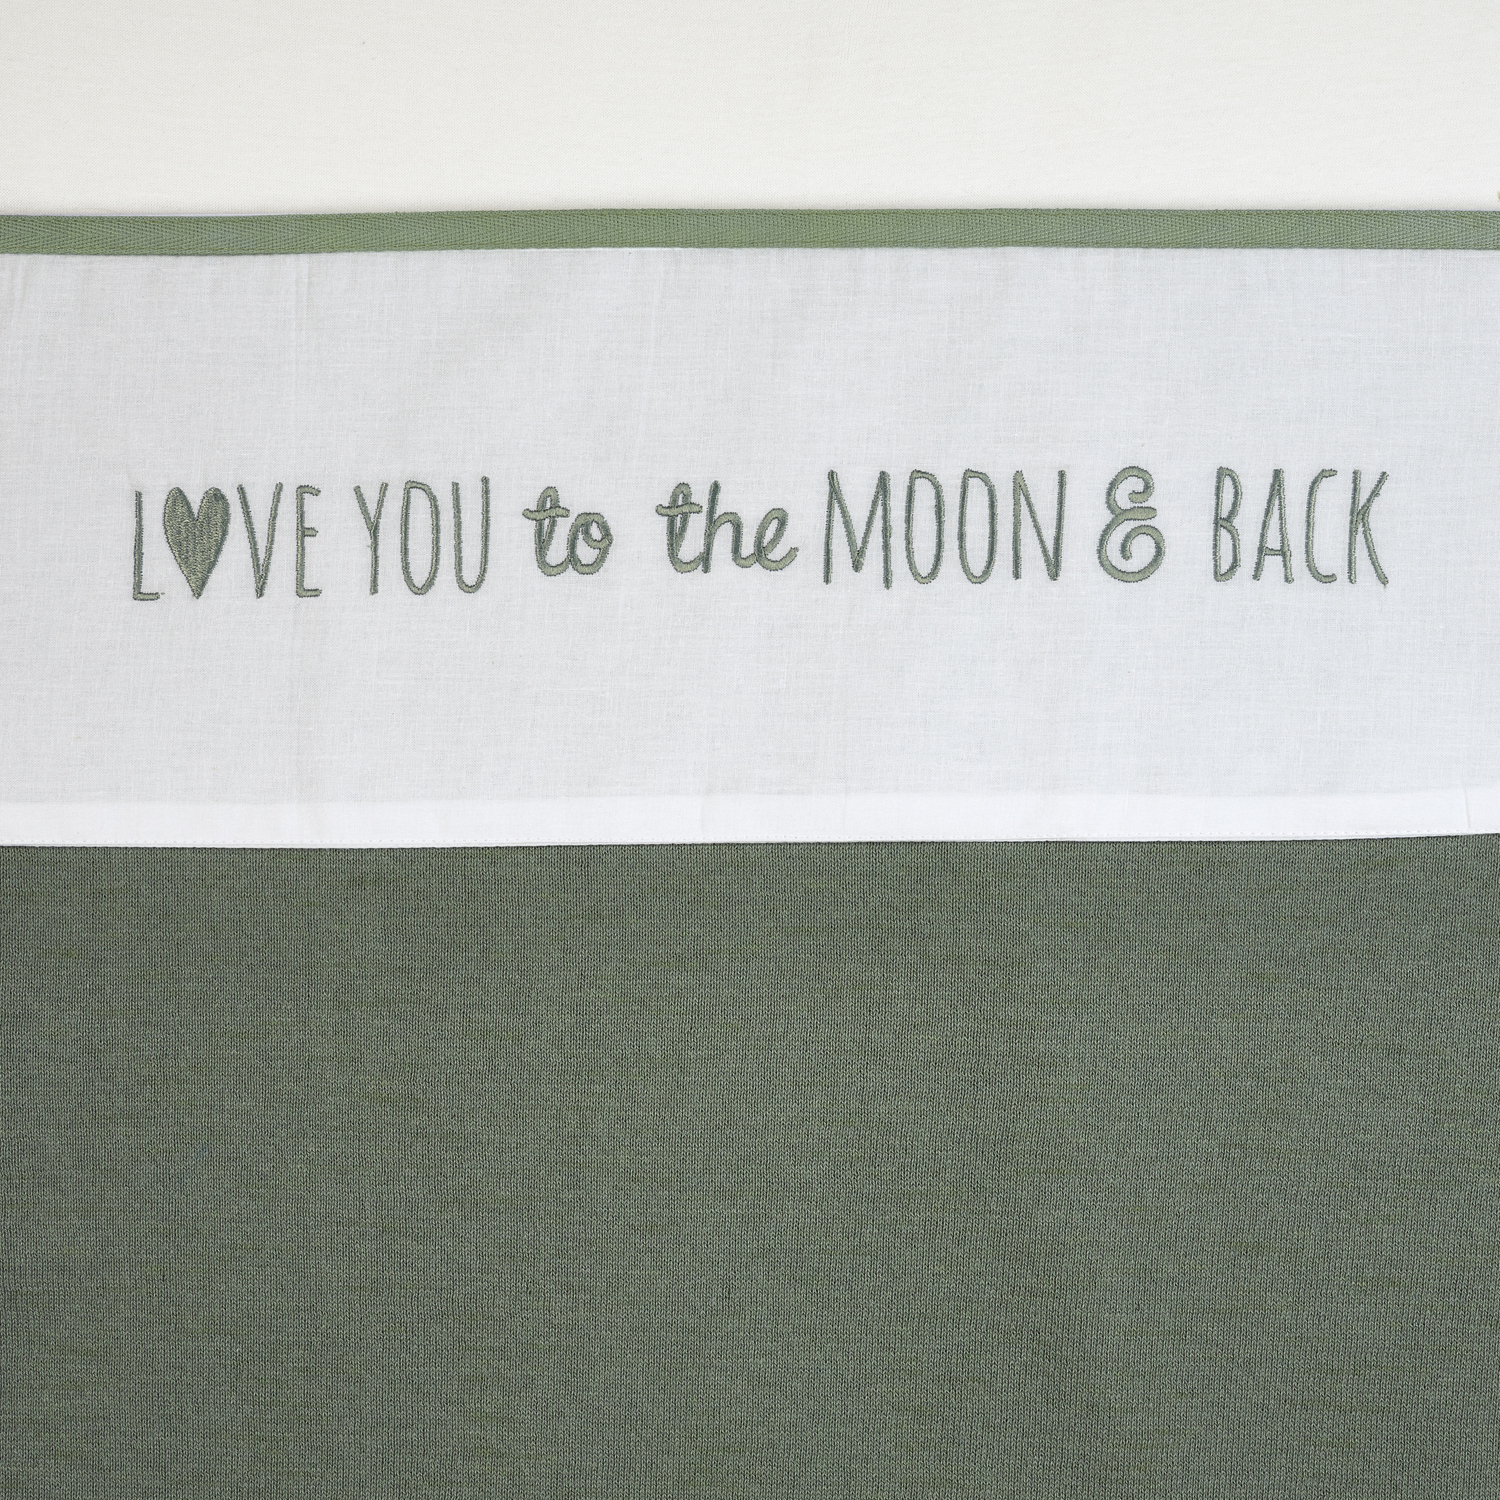 Wieglaken Love you to the moon & back - forest green - 75x100cm